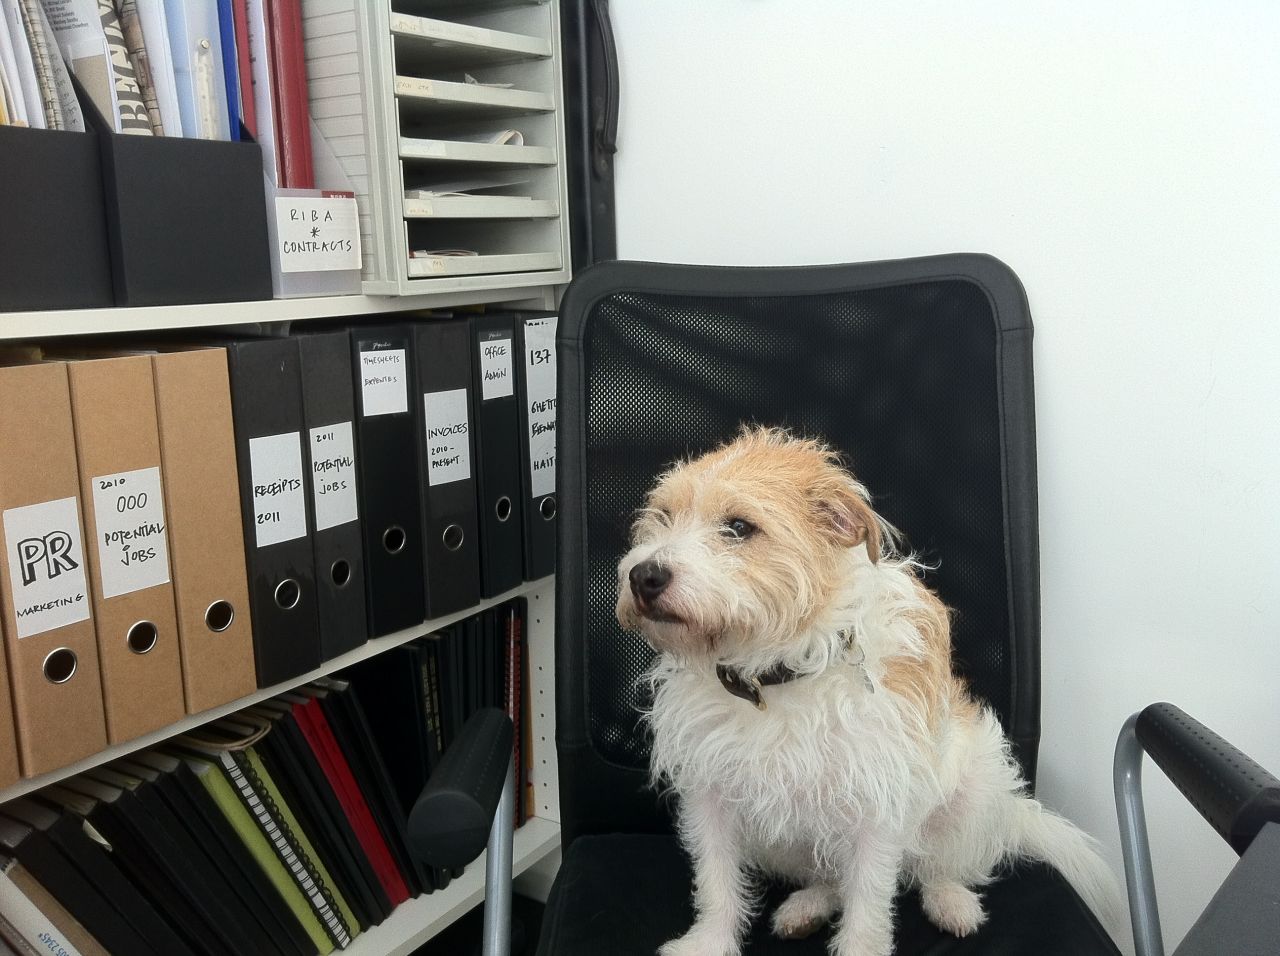 Tiger, a long-haired Jack Russell terrier, accompanies its owner to work at an architecture practice in East London. 